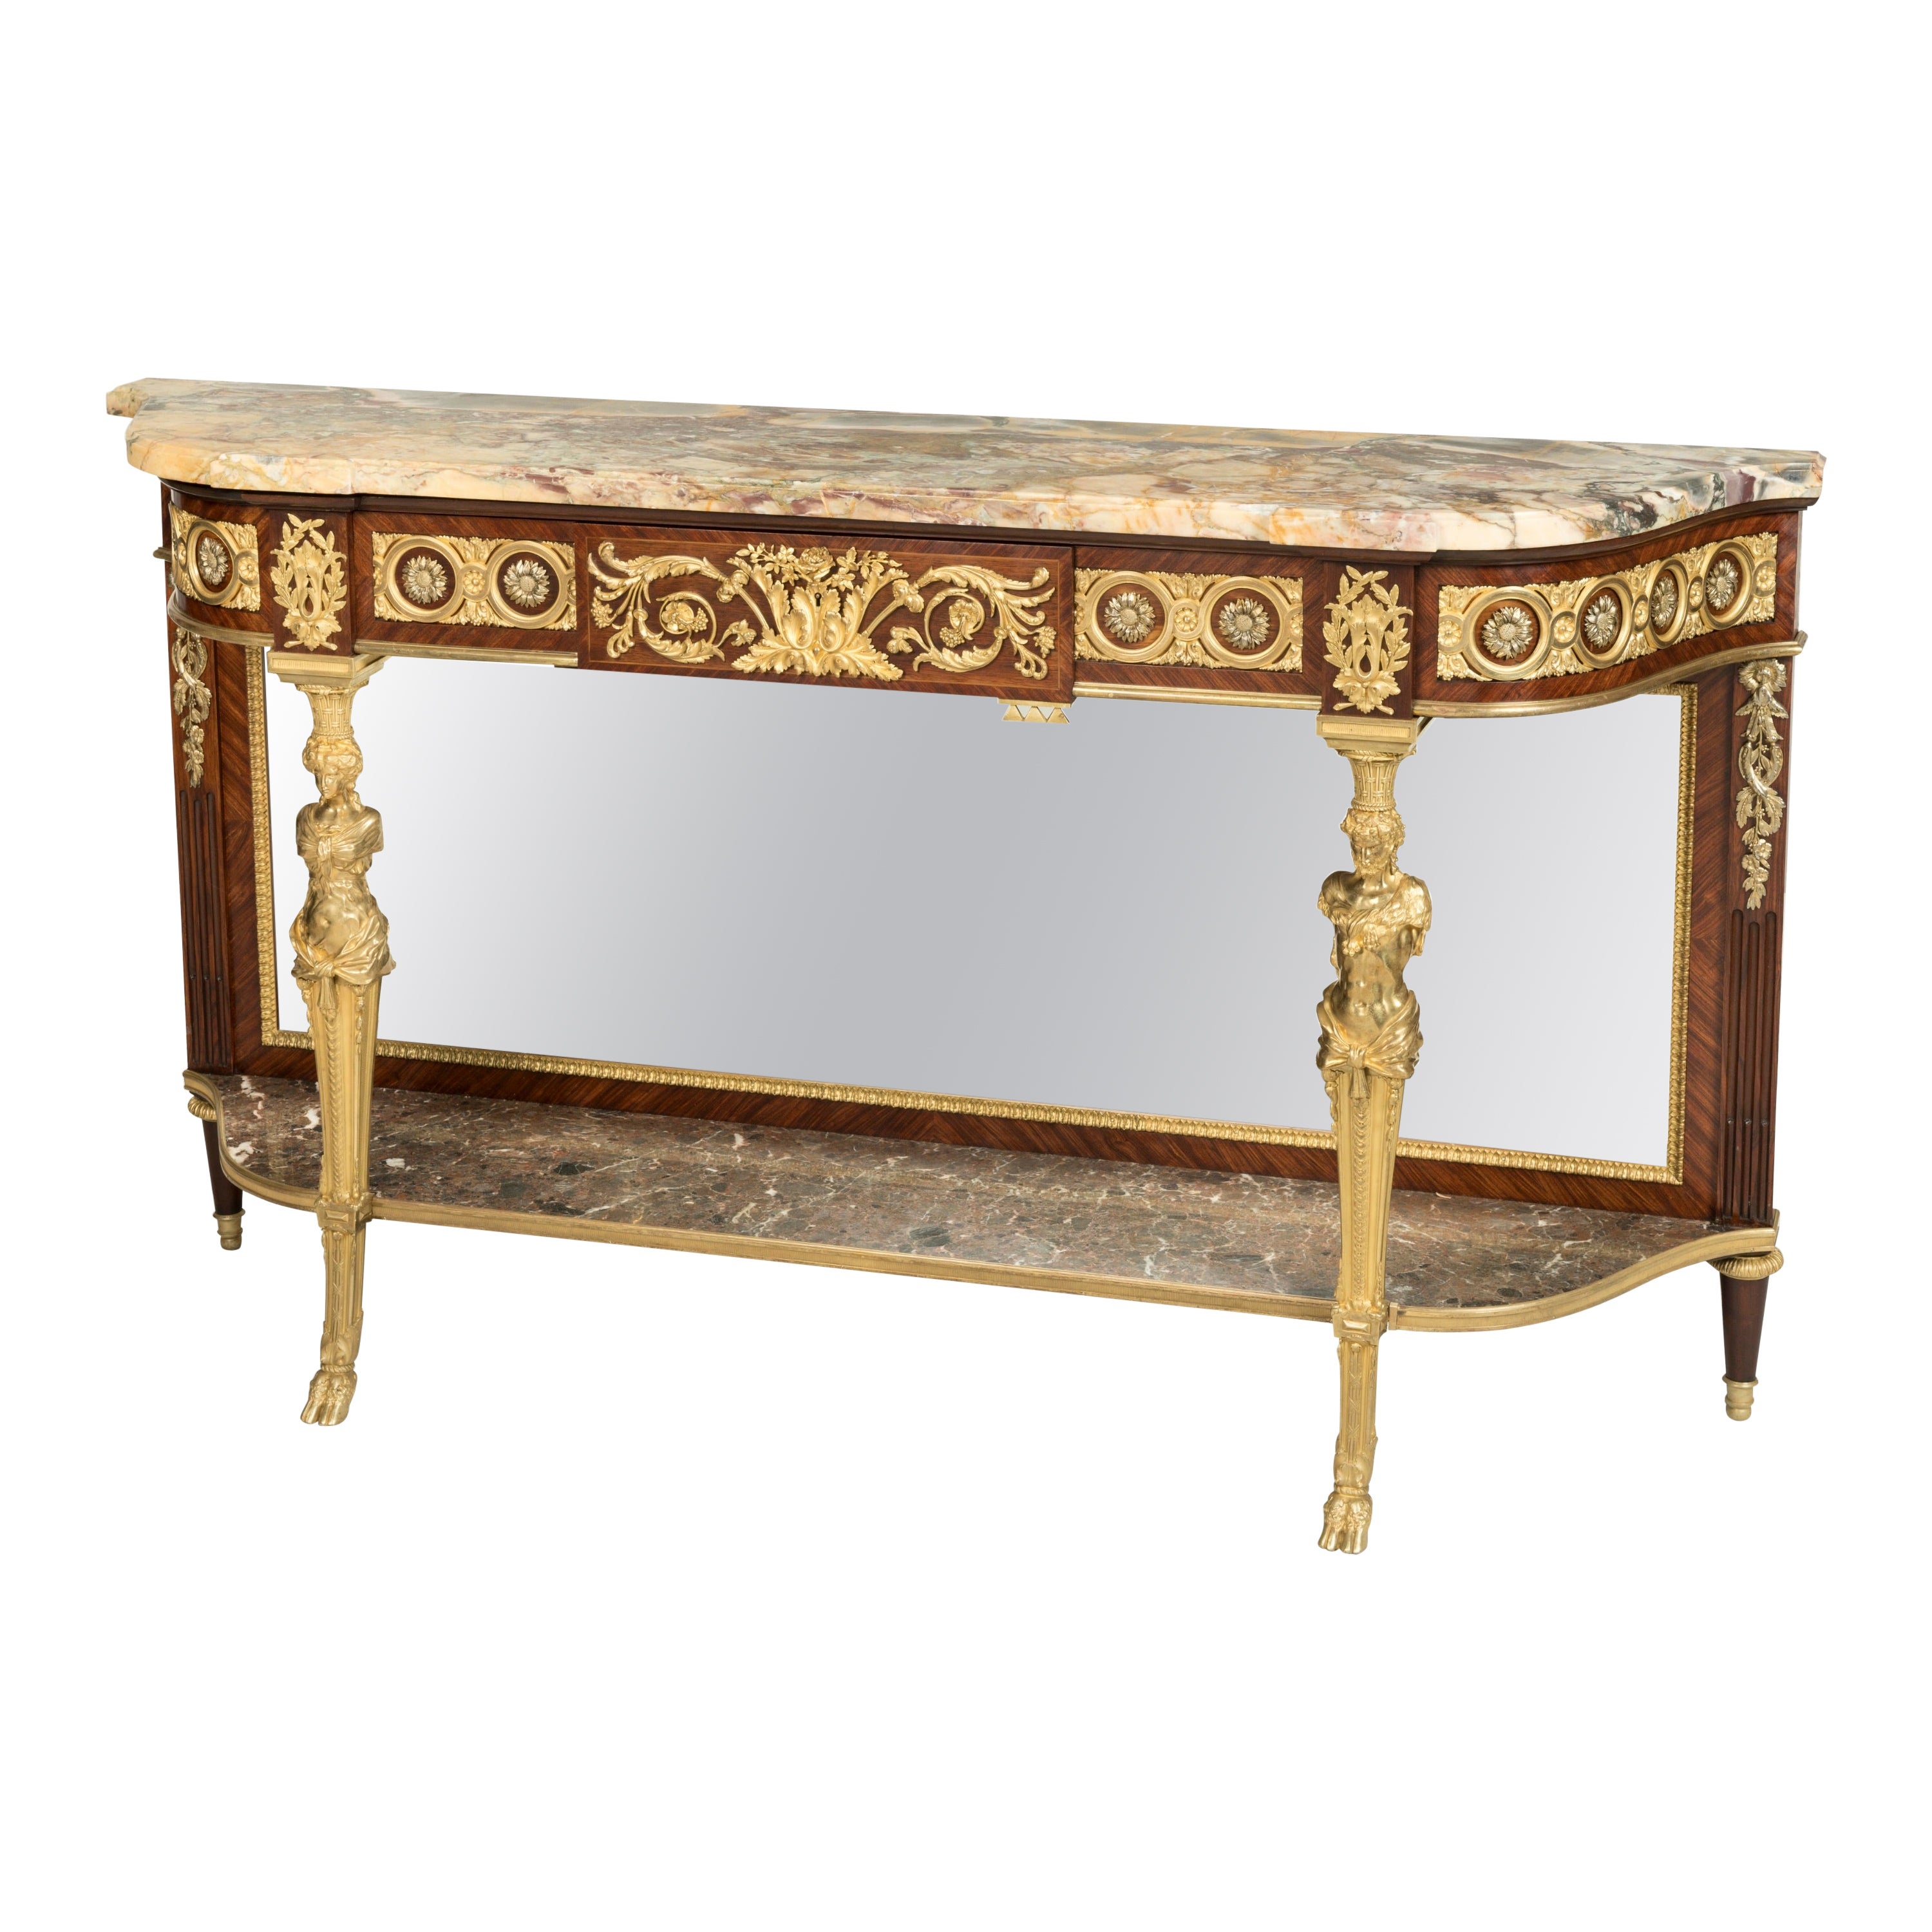 19th Century French Ormolu-Mounted Kingwood Console Table in the Louis XVI Style For Sale